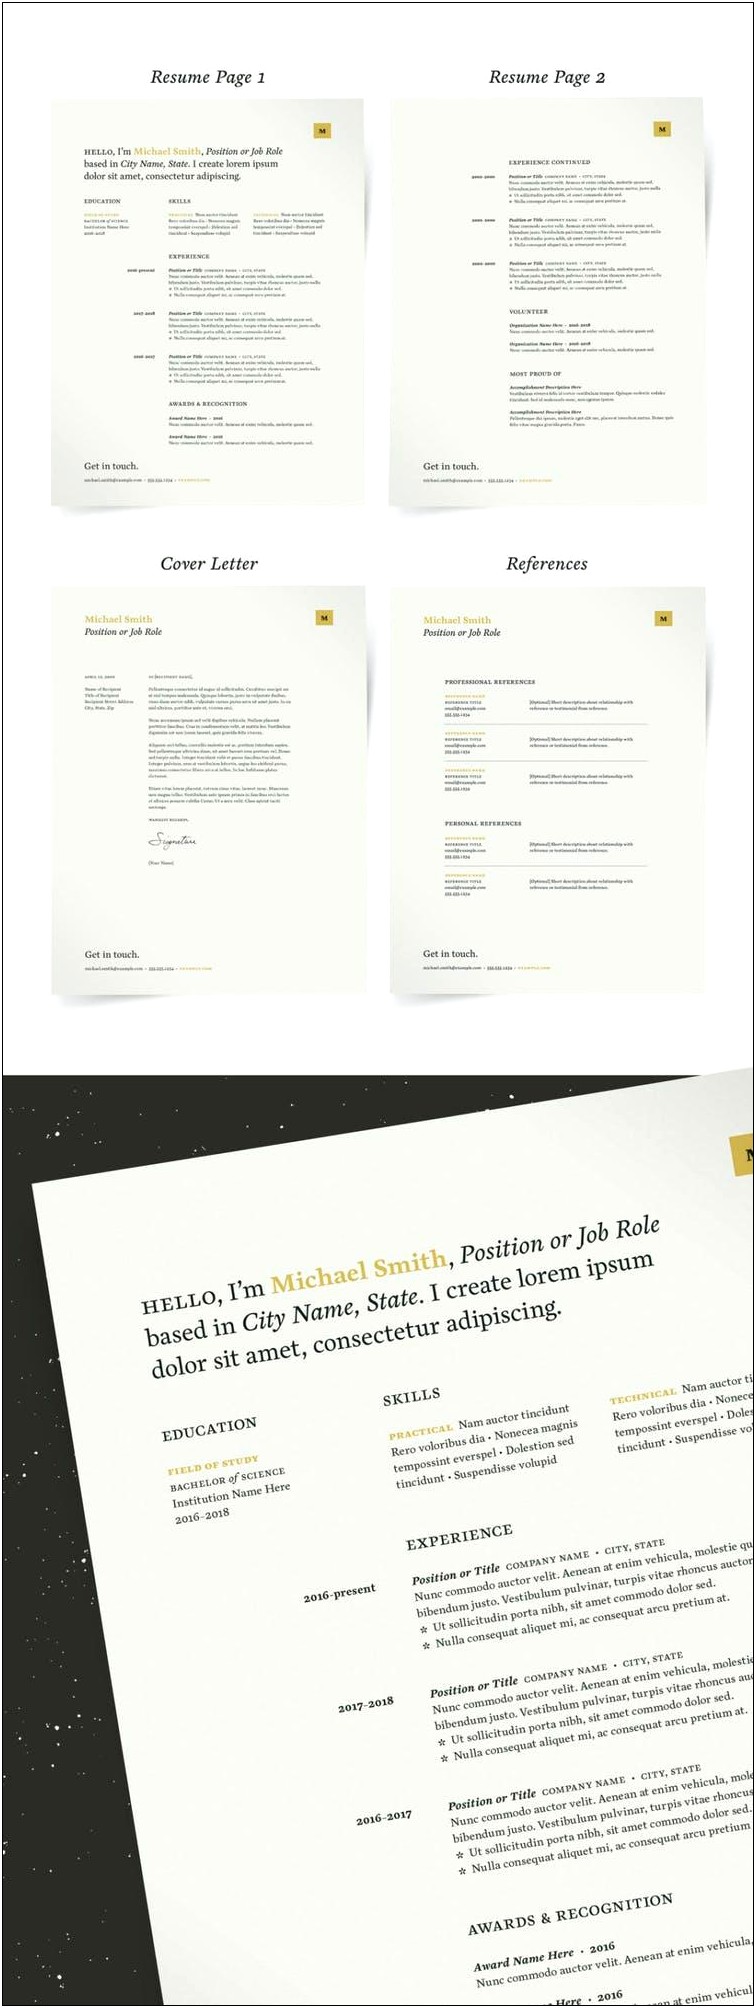 Indesign Resume Template 2018 Free